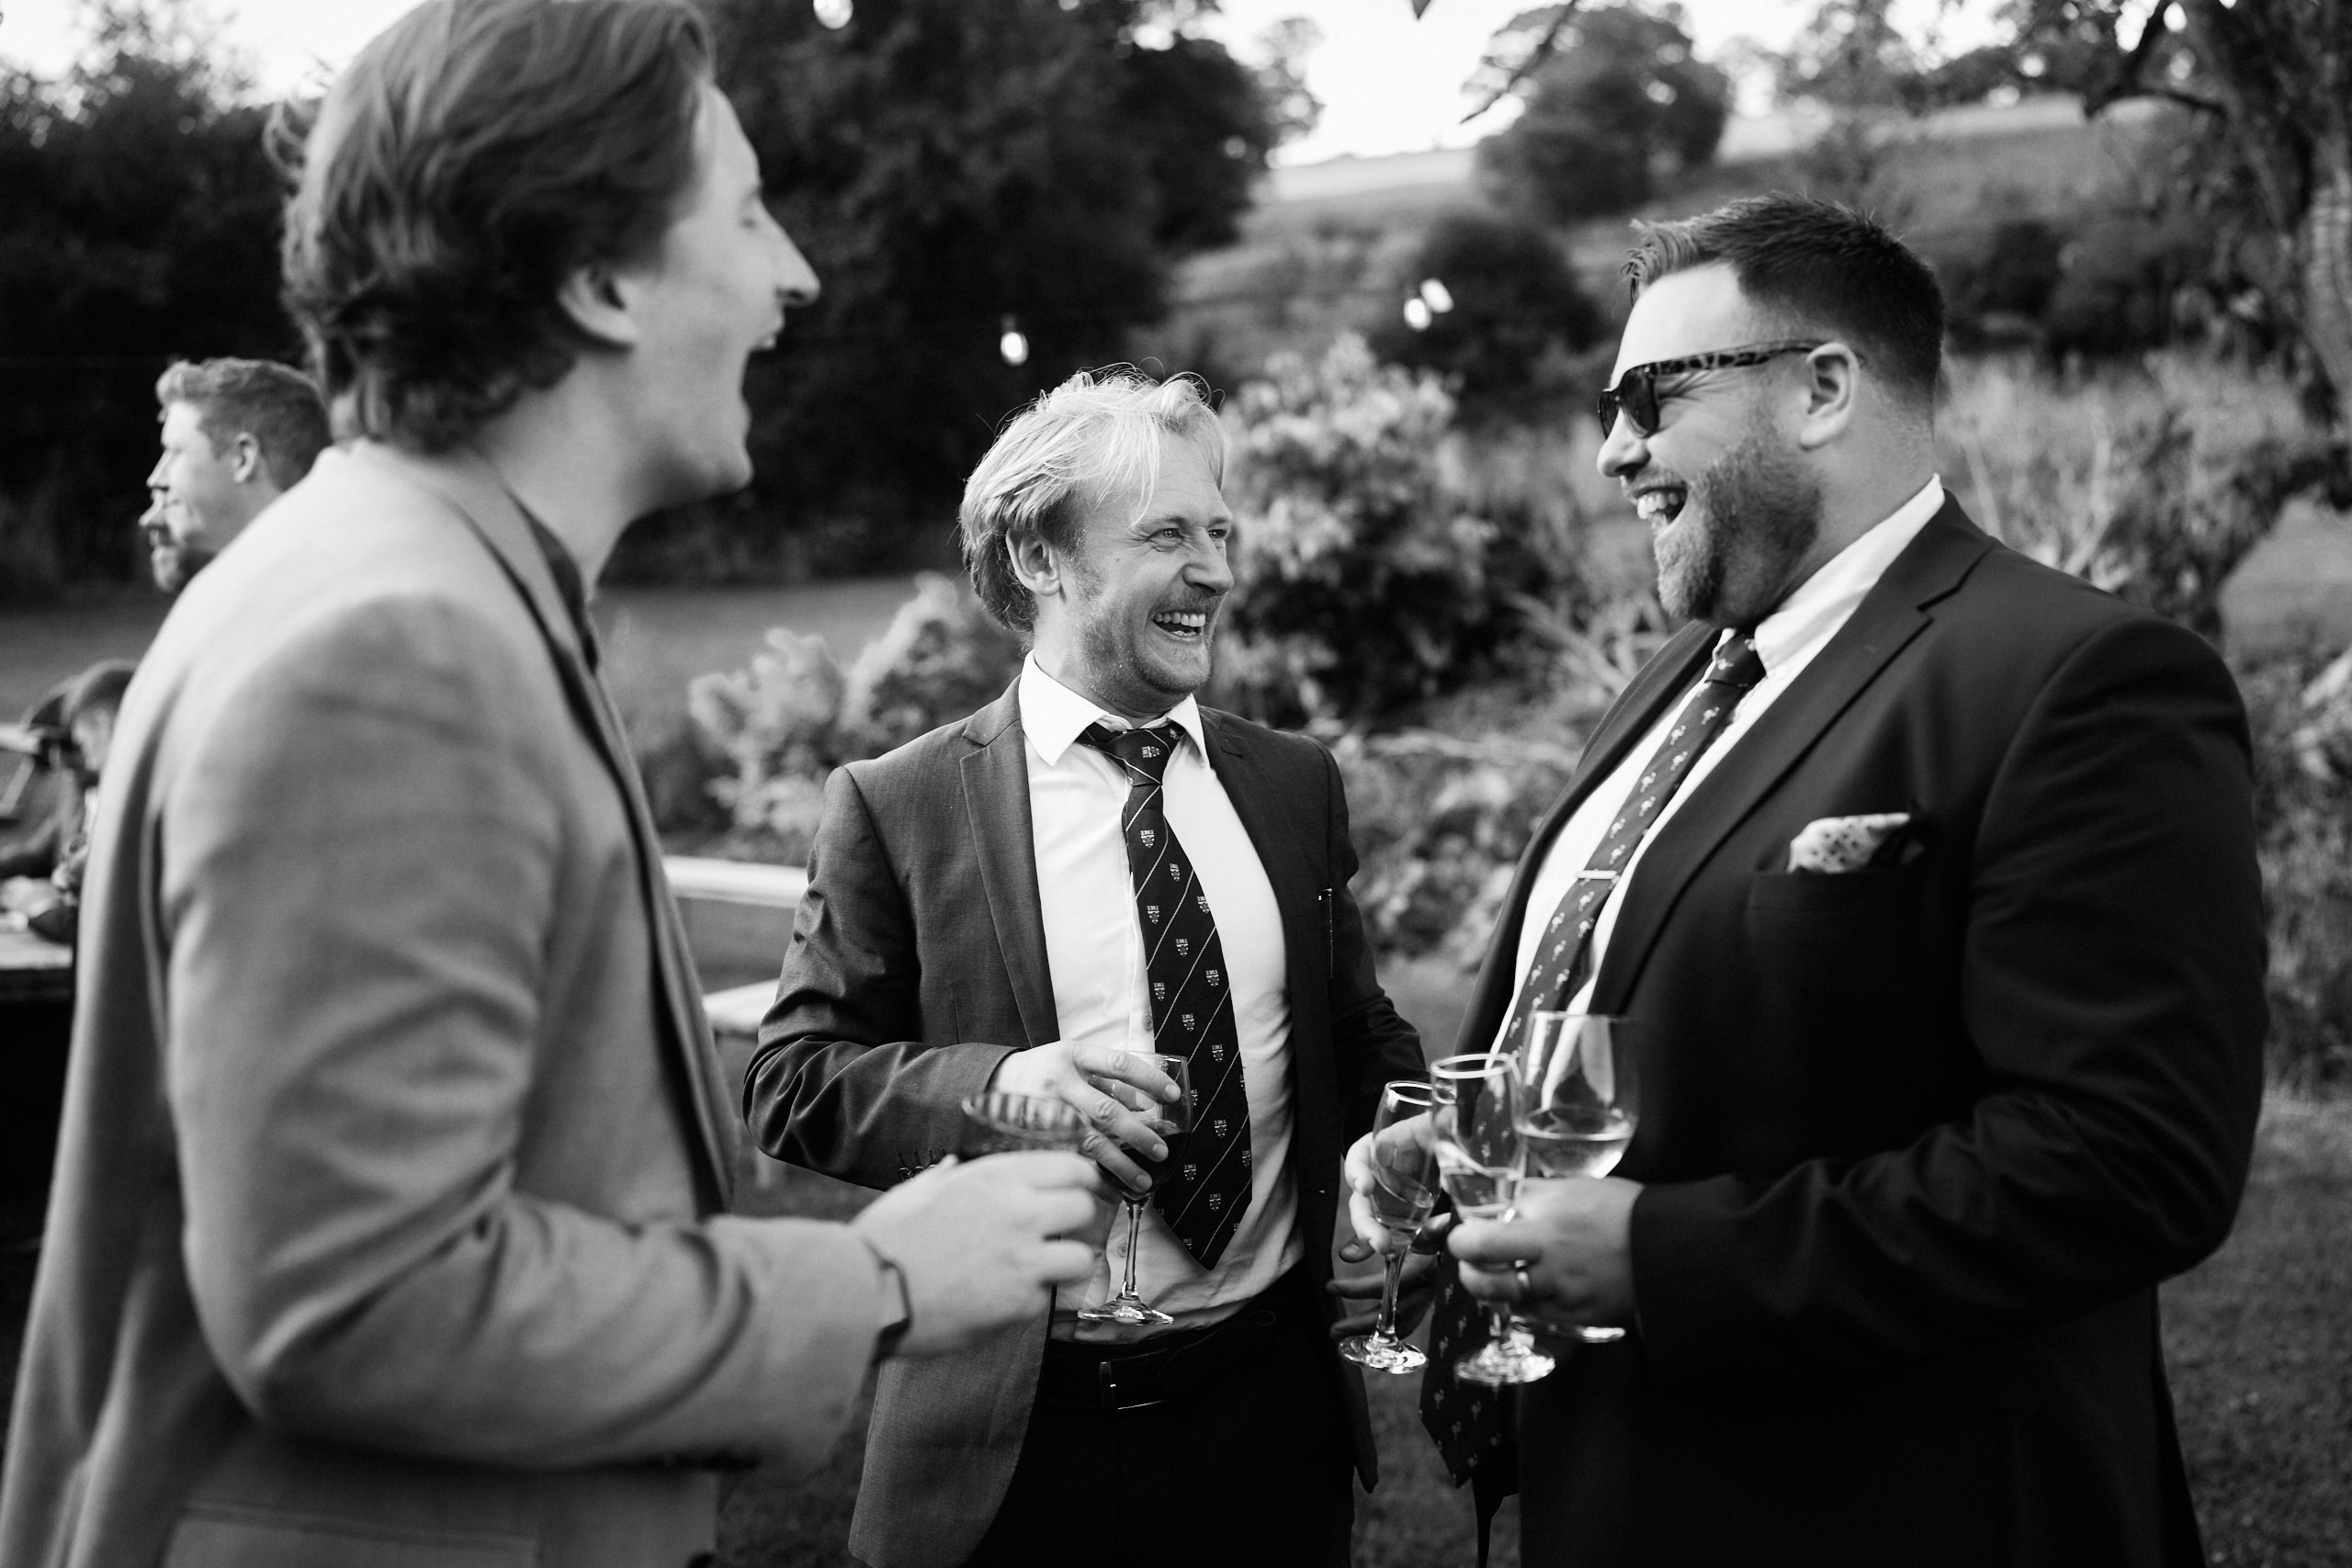 A group of men chatting in a black and white picture.